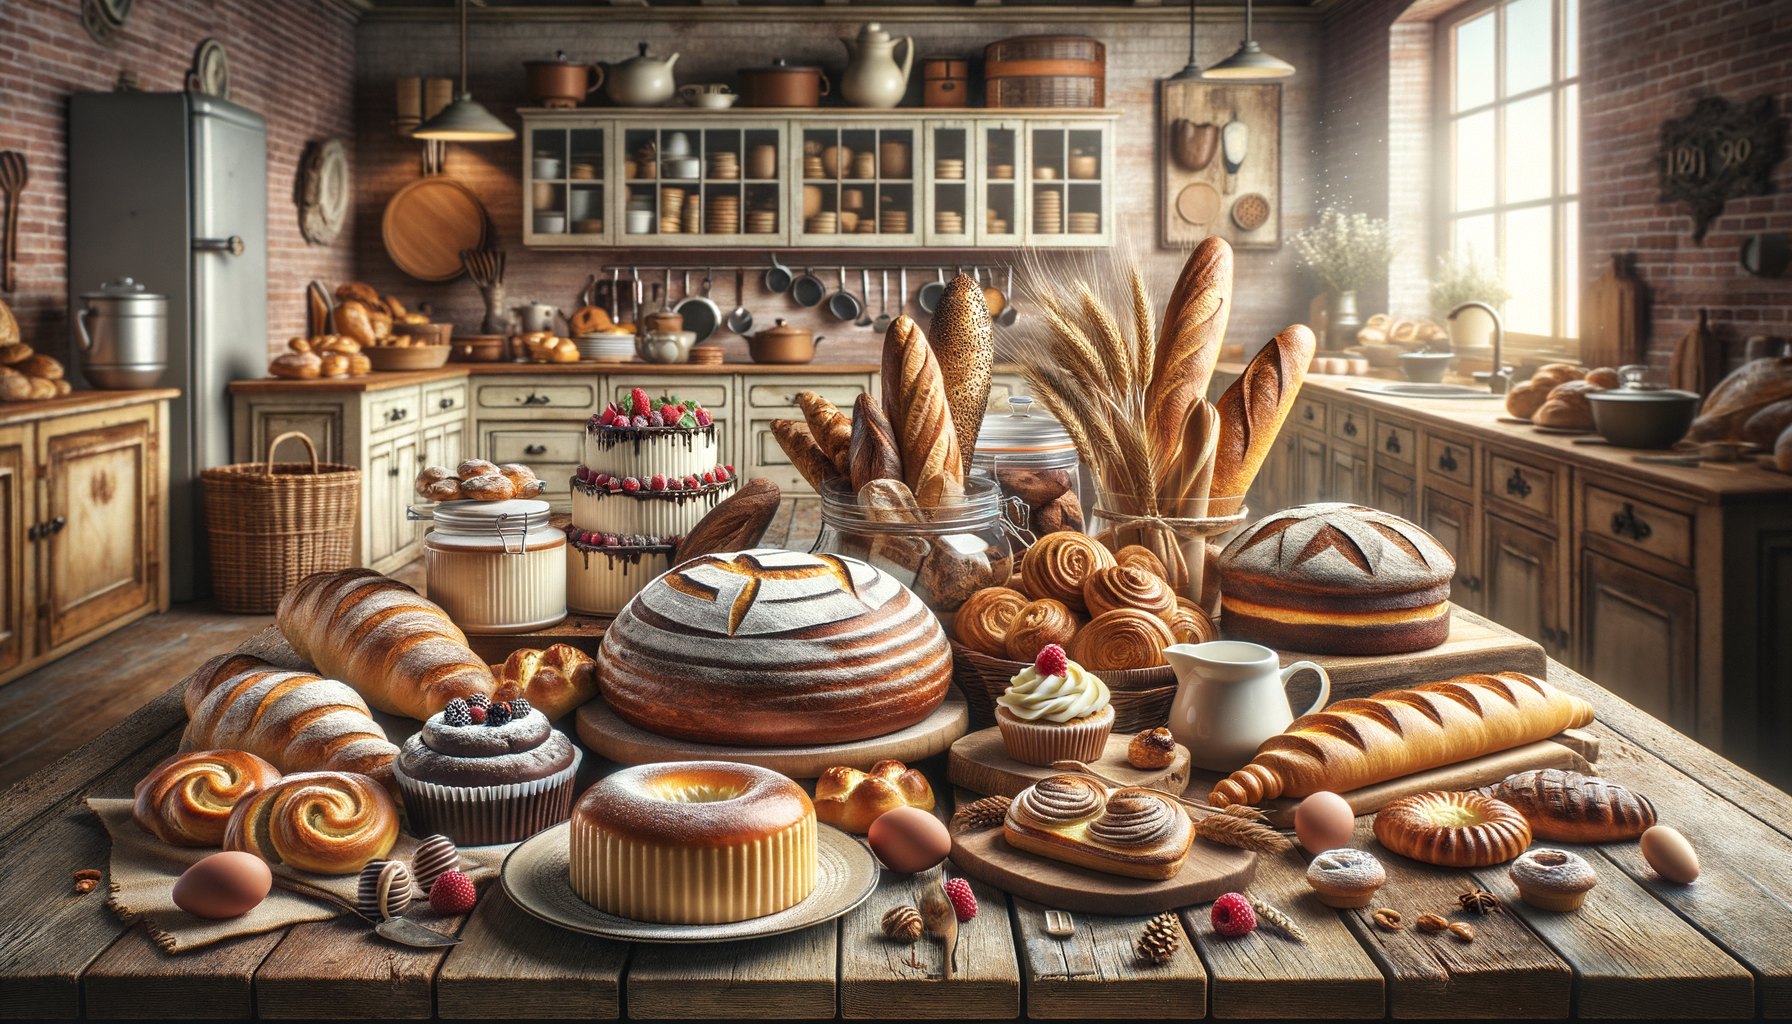 Assorted baked goods on a wooden table in a cozy kitchen setting, depicting the baking category.